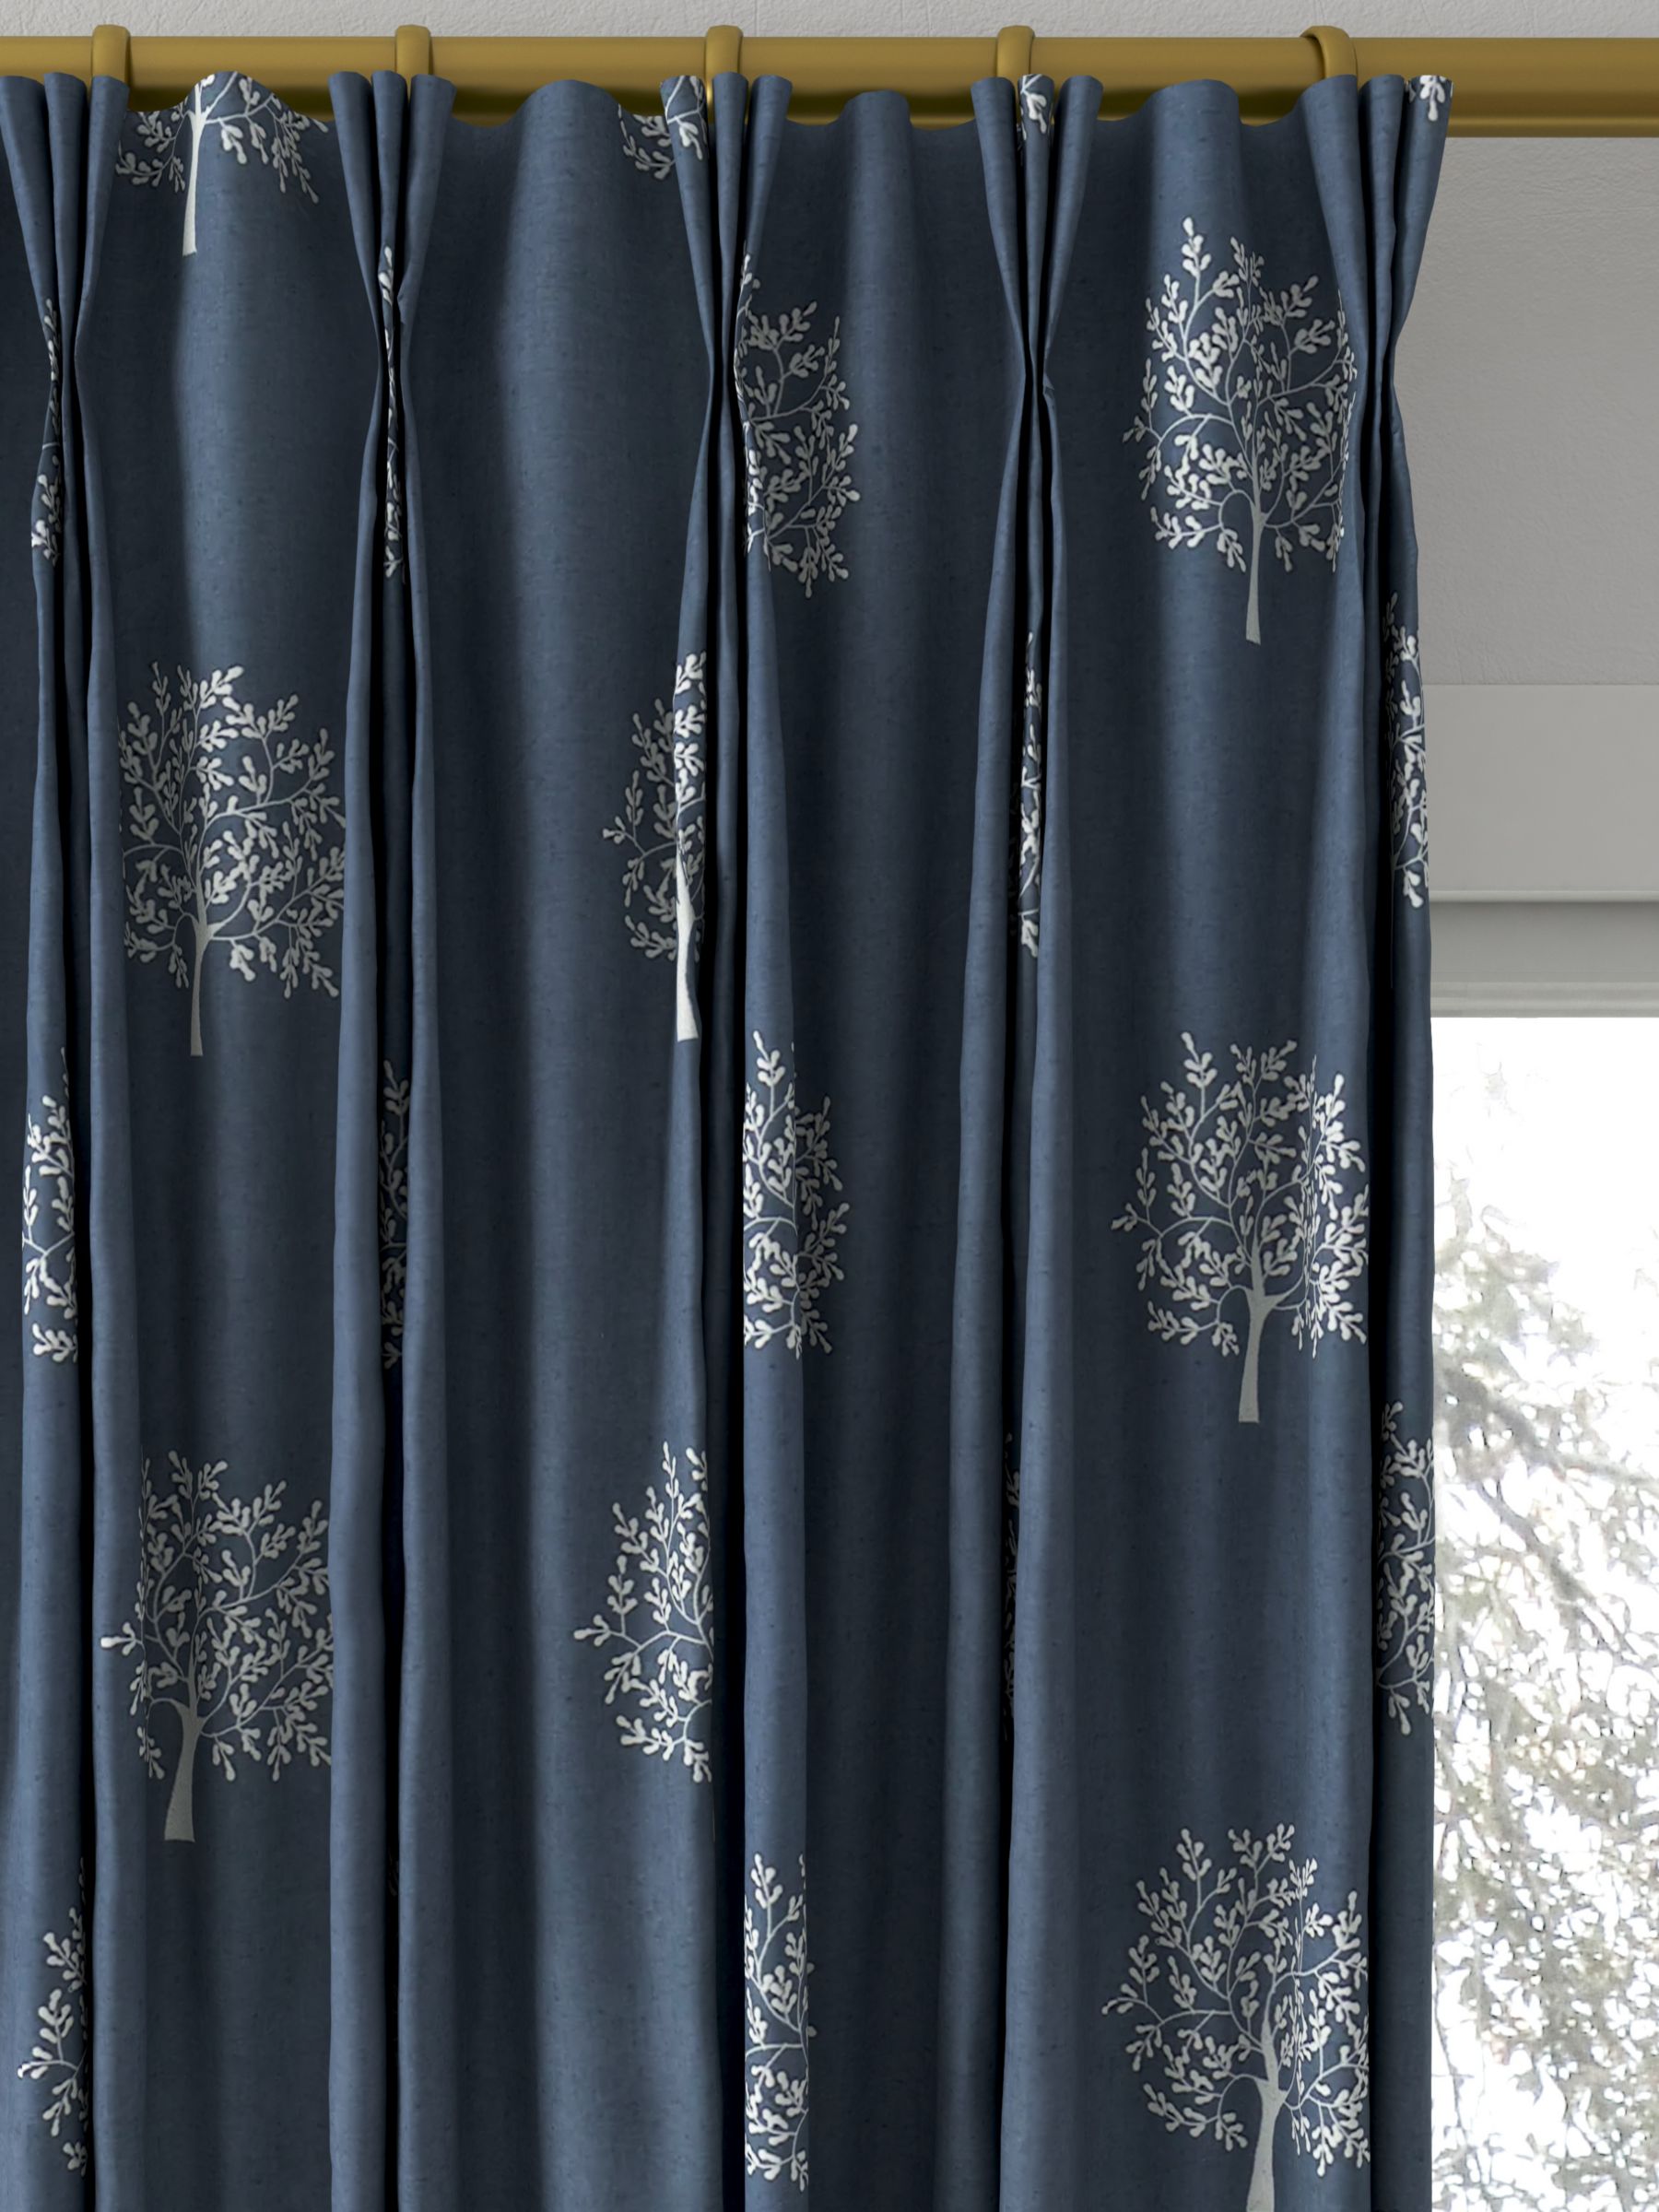 Morris & Co. Woodland Tree Made to Measure Curtains, Grey/Blue/Ivory